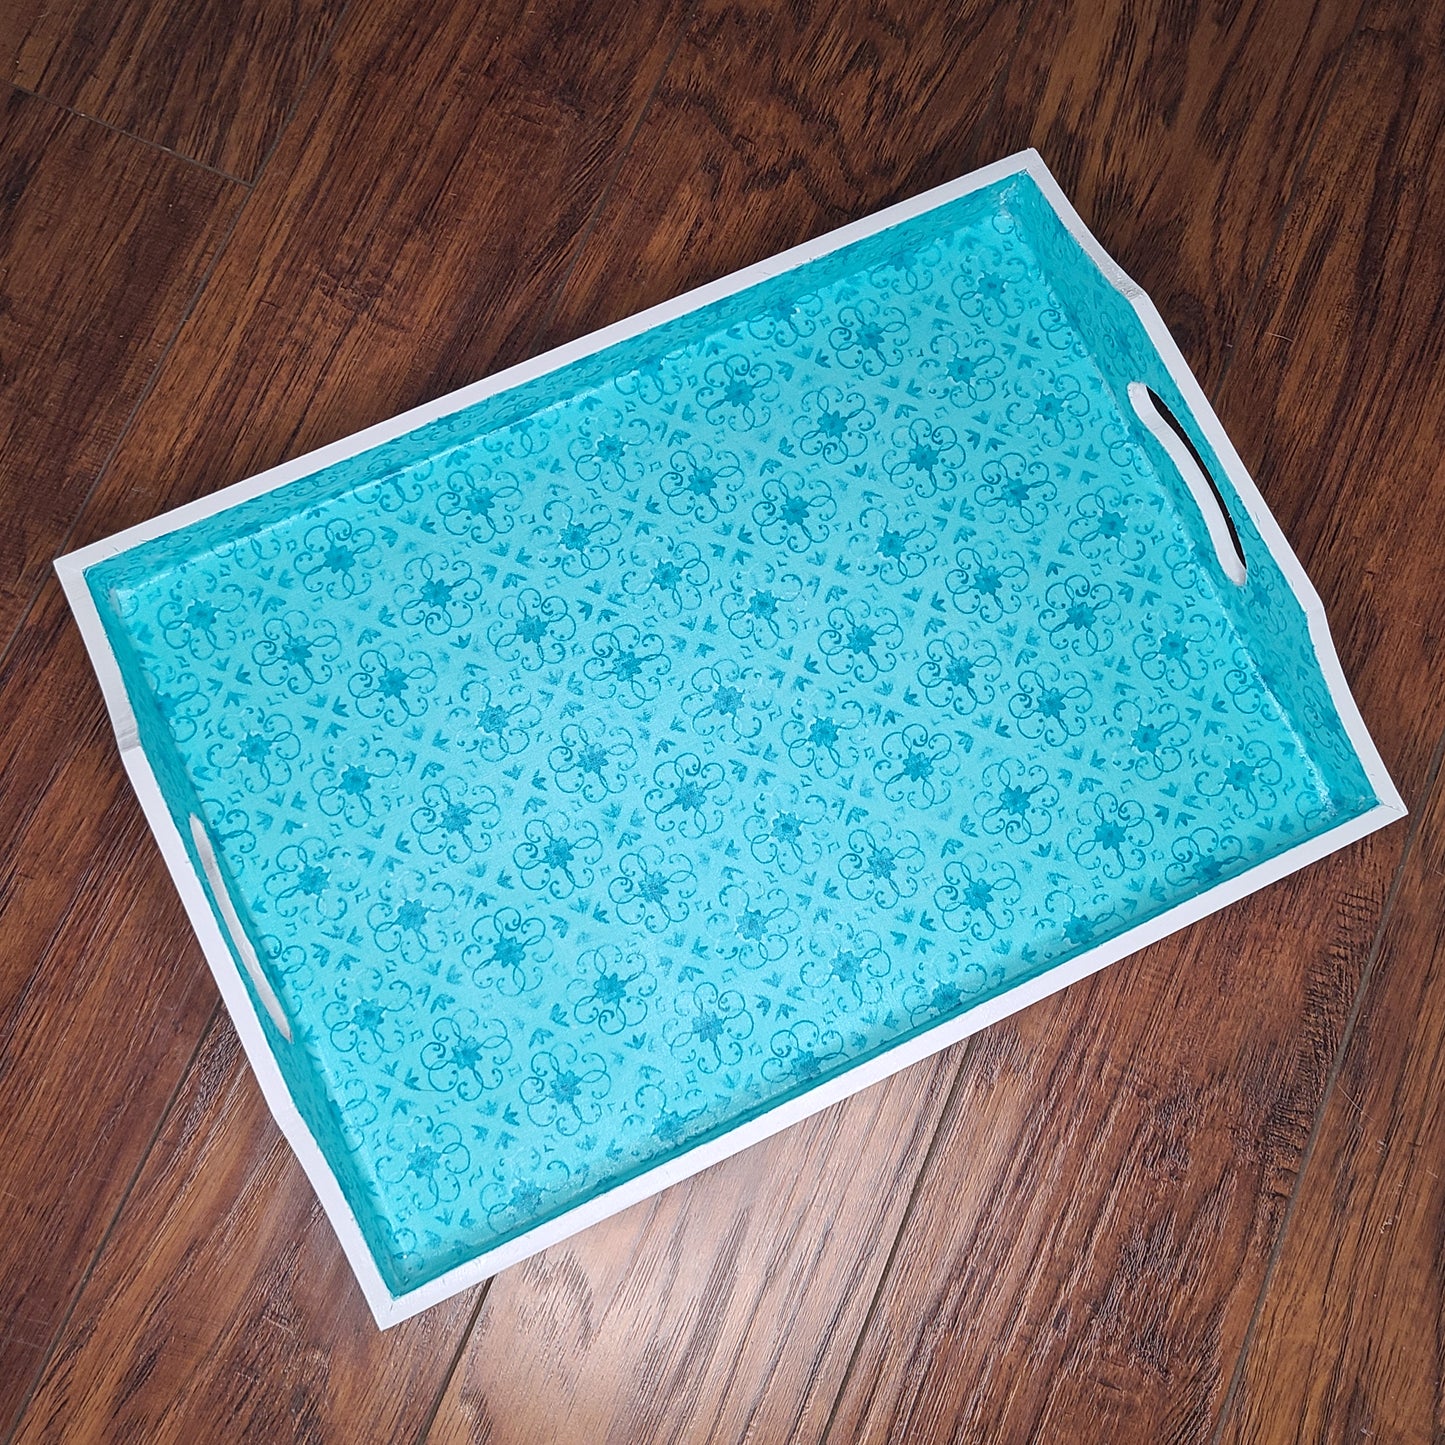 Teal Flowers tray